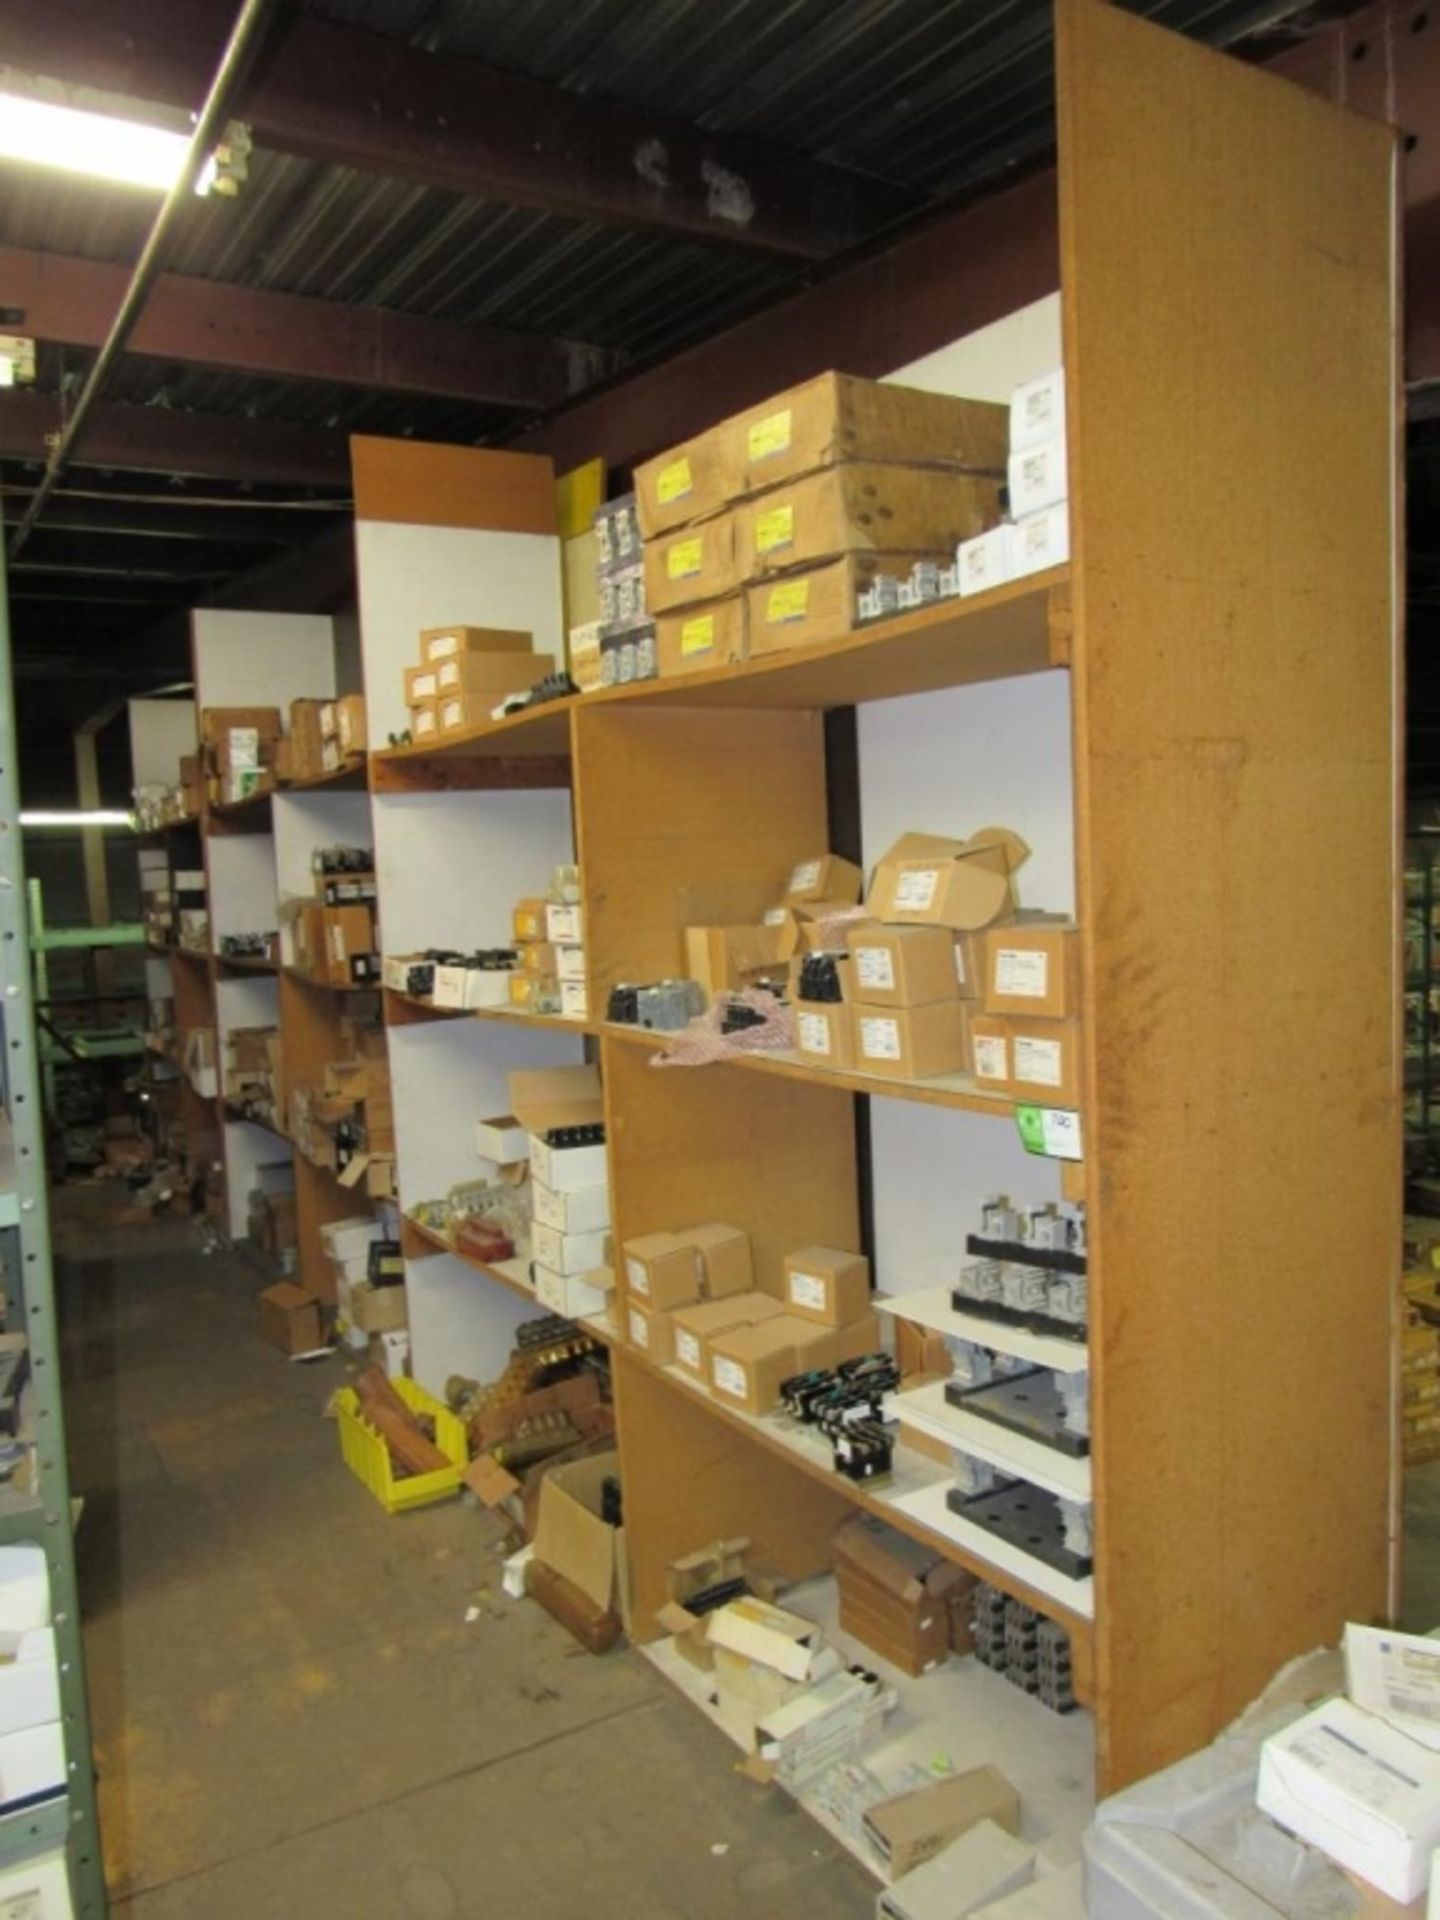 Shelving Units and Contents-